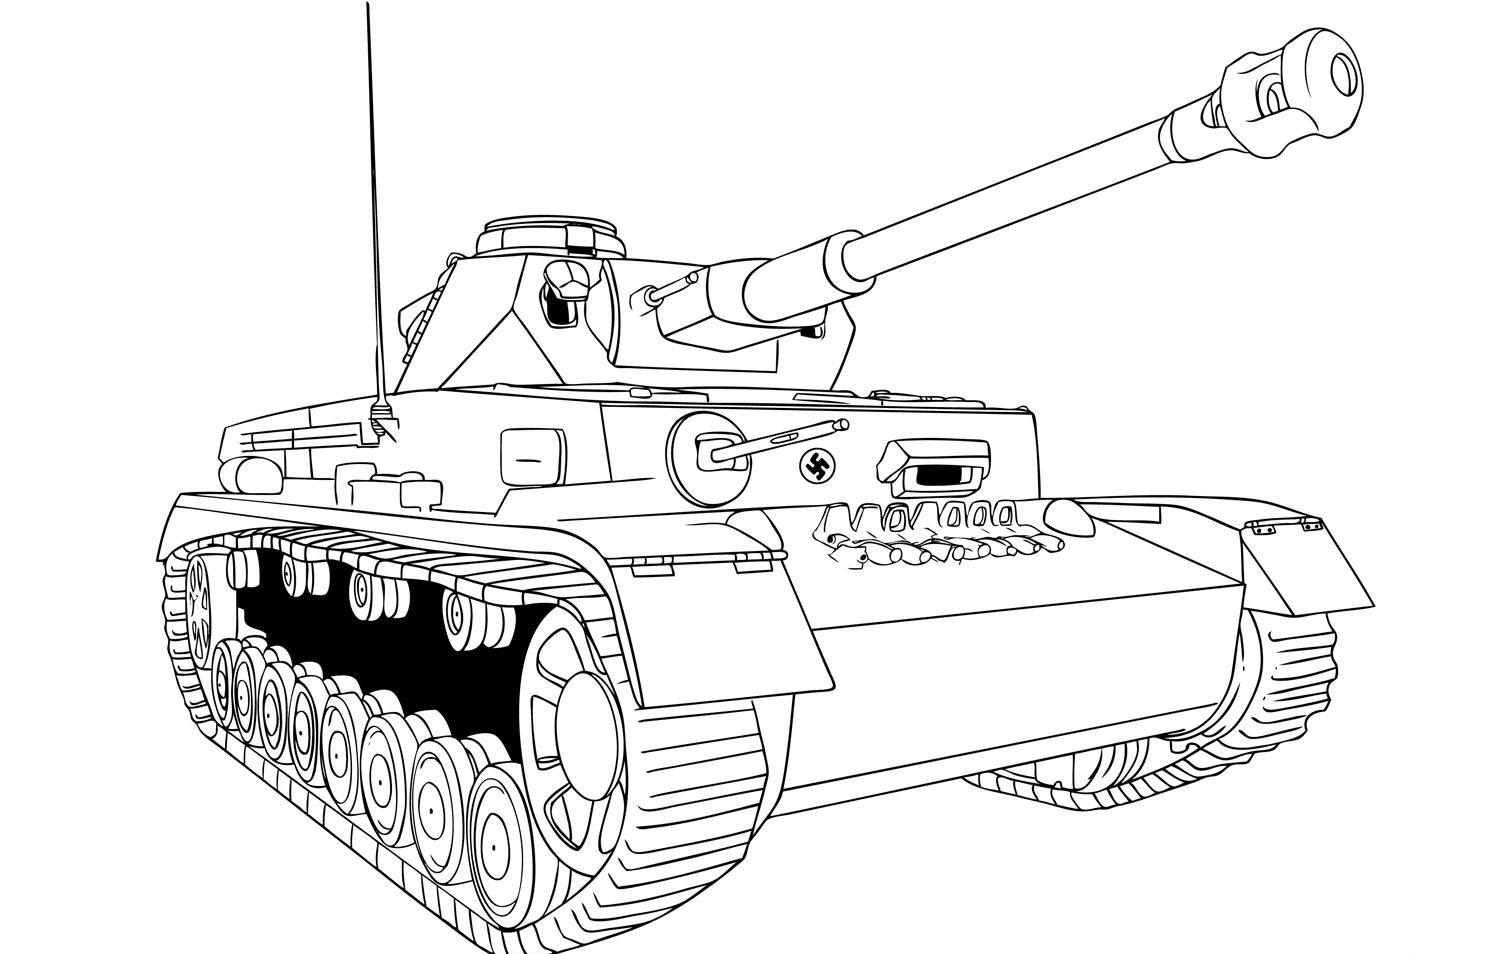 how-to-draw-a-panzer-tank-step-8_1_000000015350_5